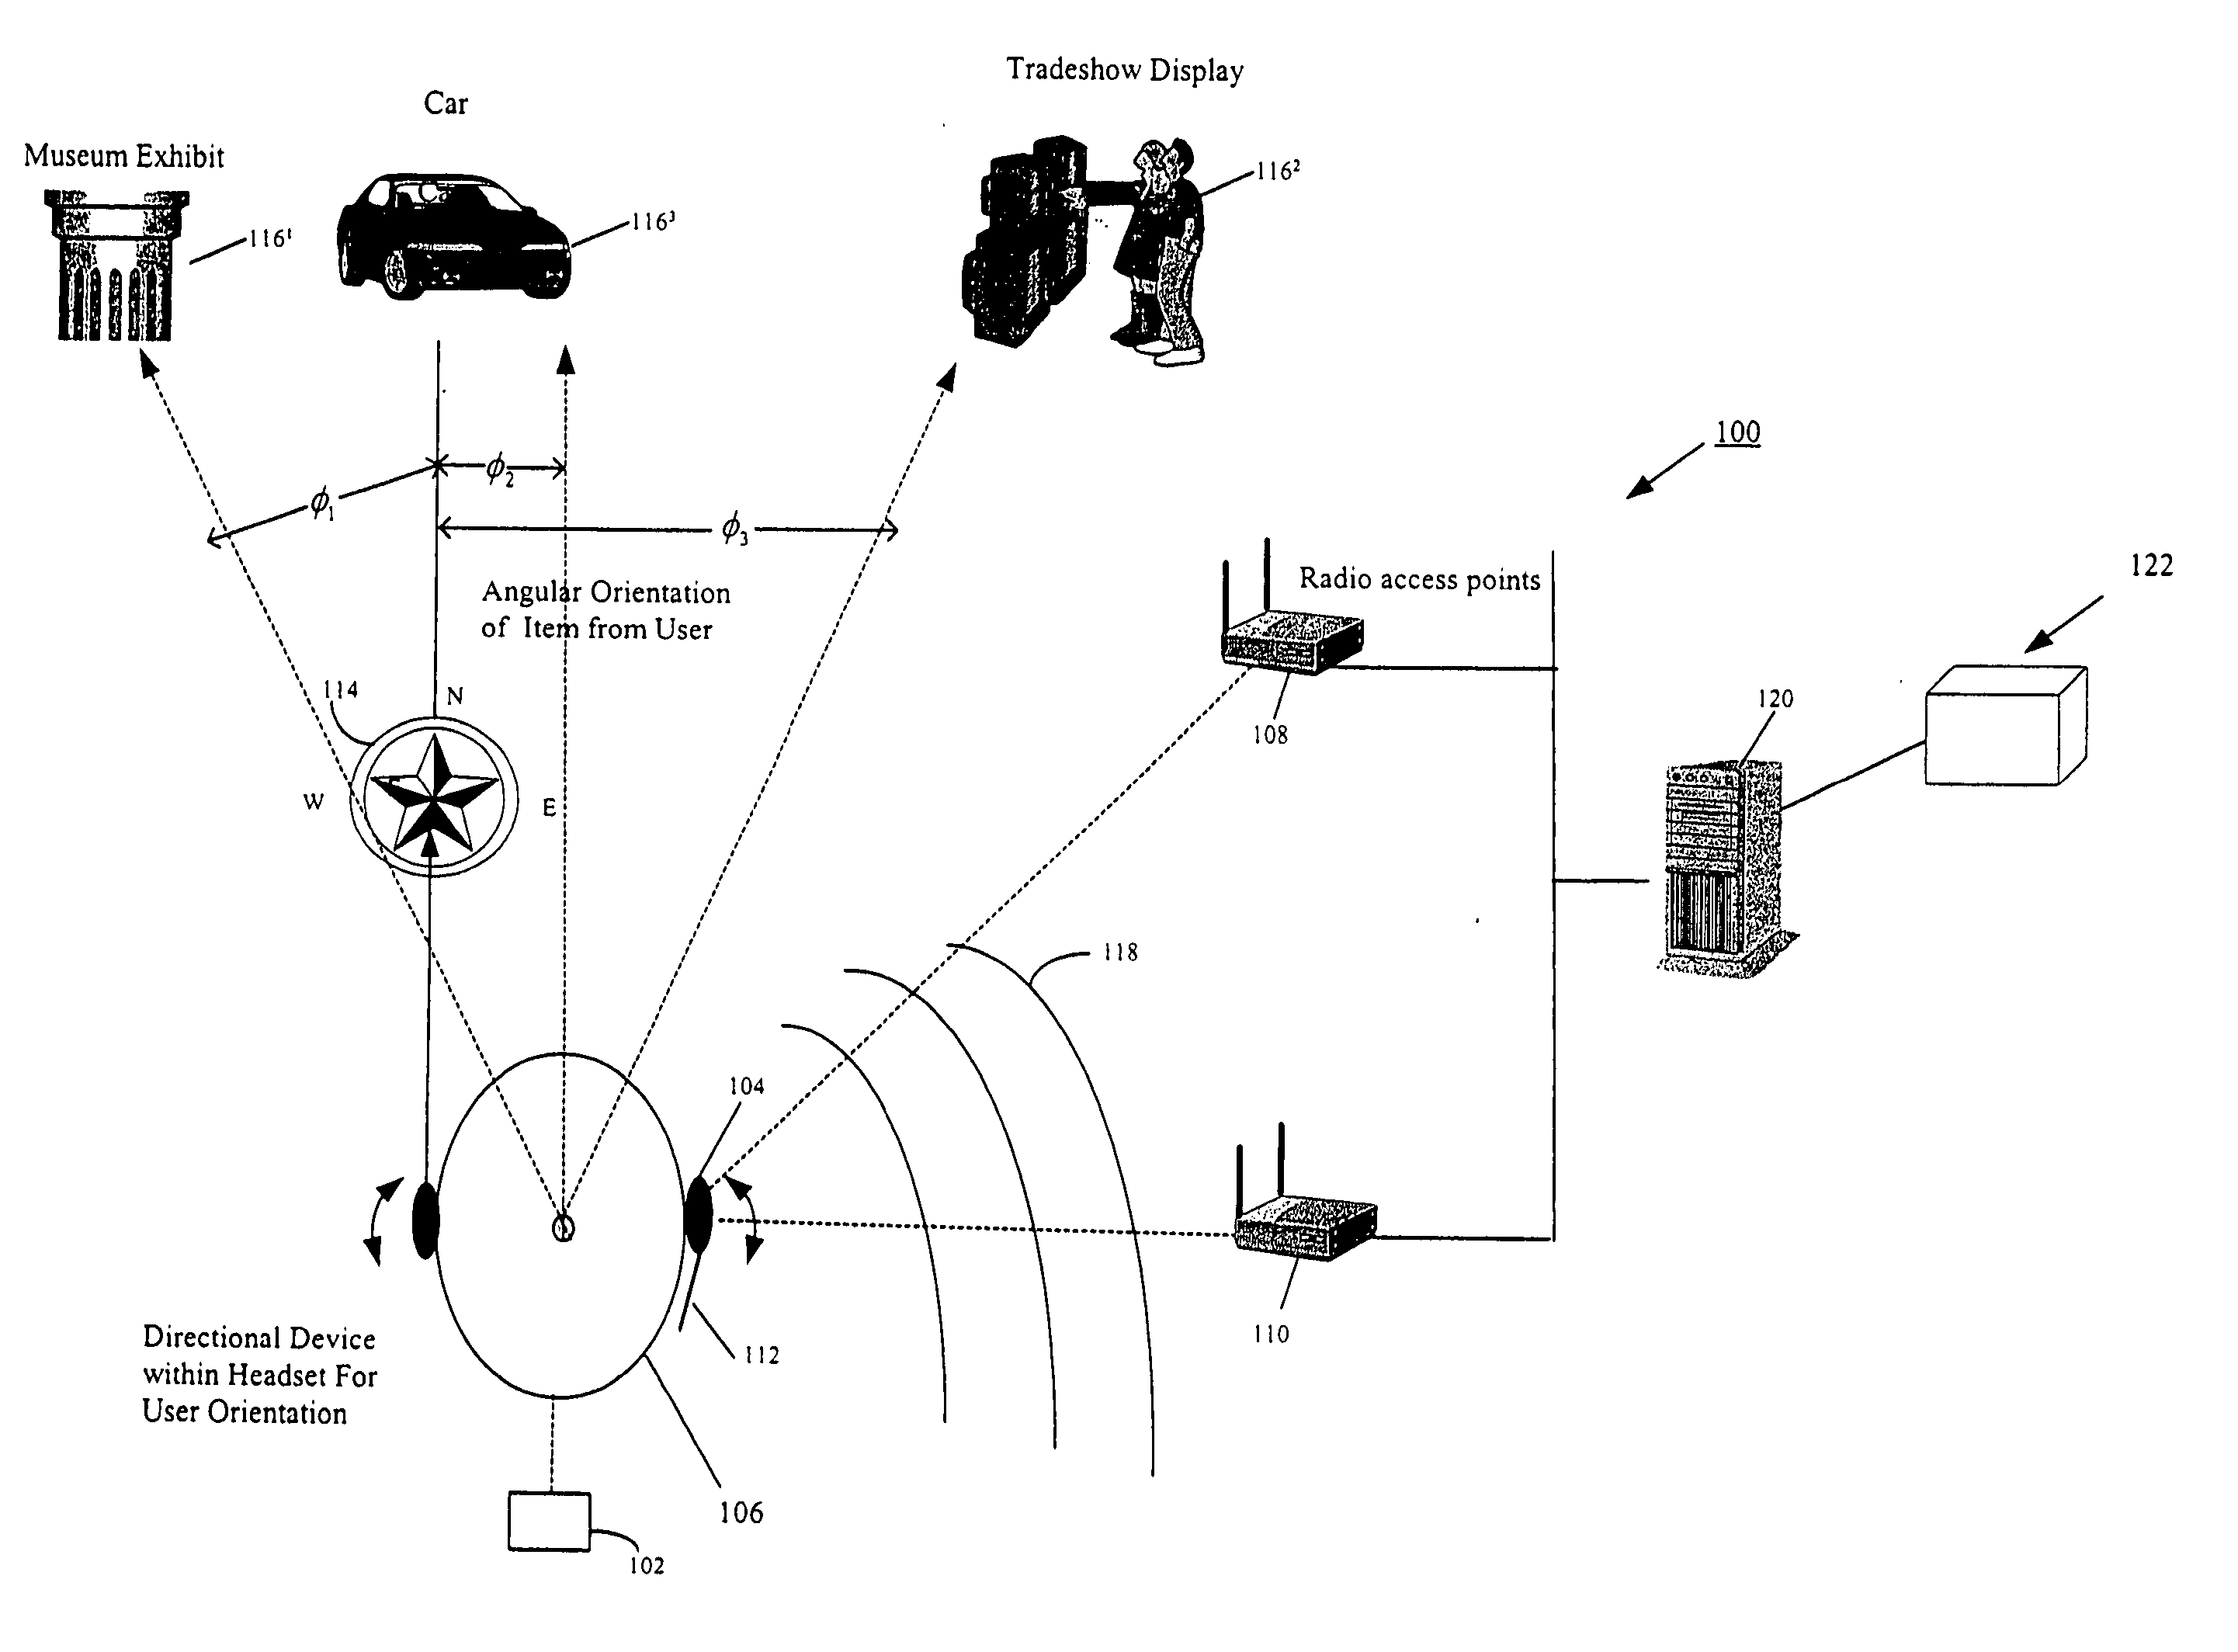 Telemetric contextually based spatial audio system integrated into a mobile terminal wireless system